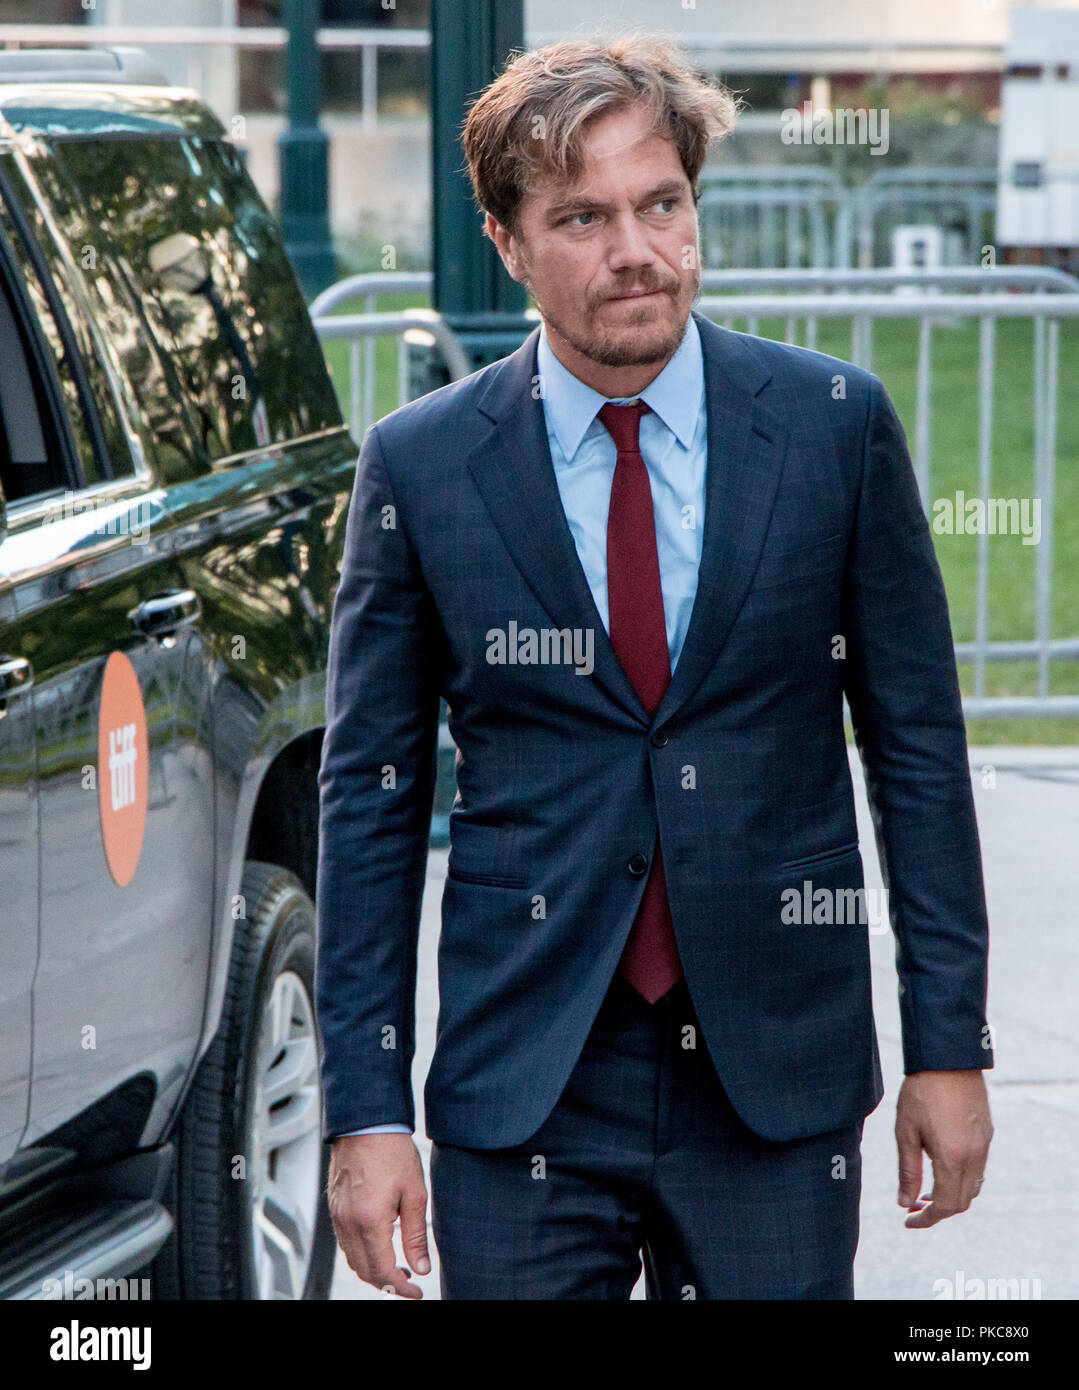 Toronto, Canada. 12th Sep 2018. Toronto International Film Festival, Toronto, Canada. 12th September 2018. Michael Shannon arrives to greet fans outside the Roy Thompson Hall in Toronto. Credit: tdotdave/Alamy Live News Stock Photo